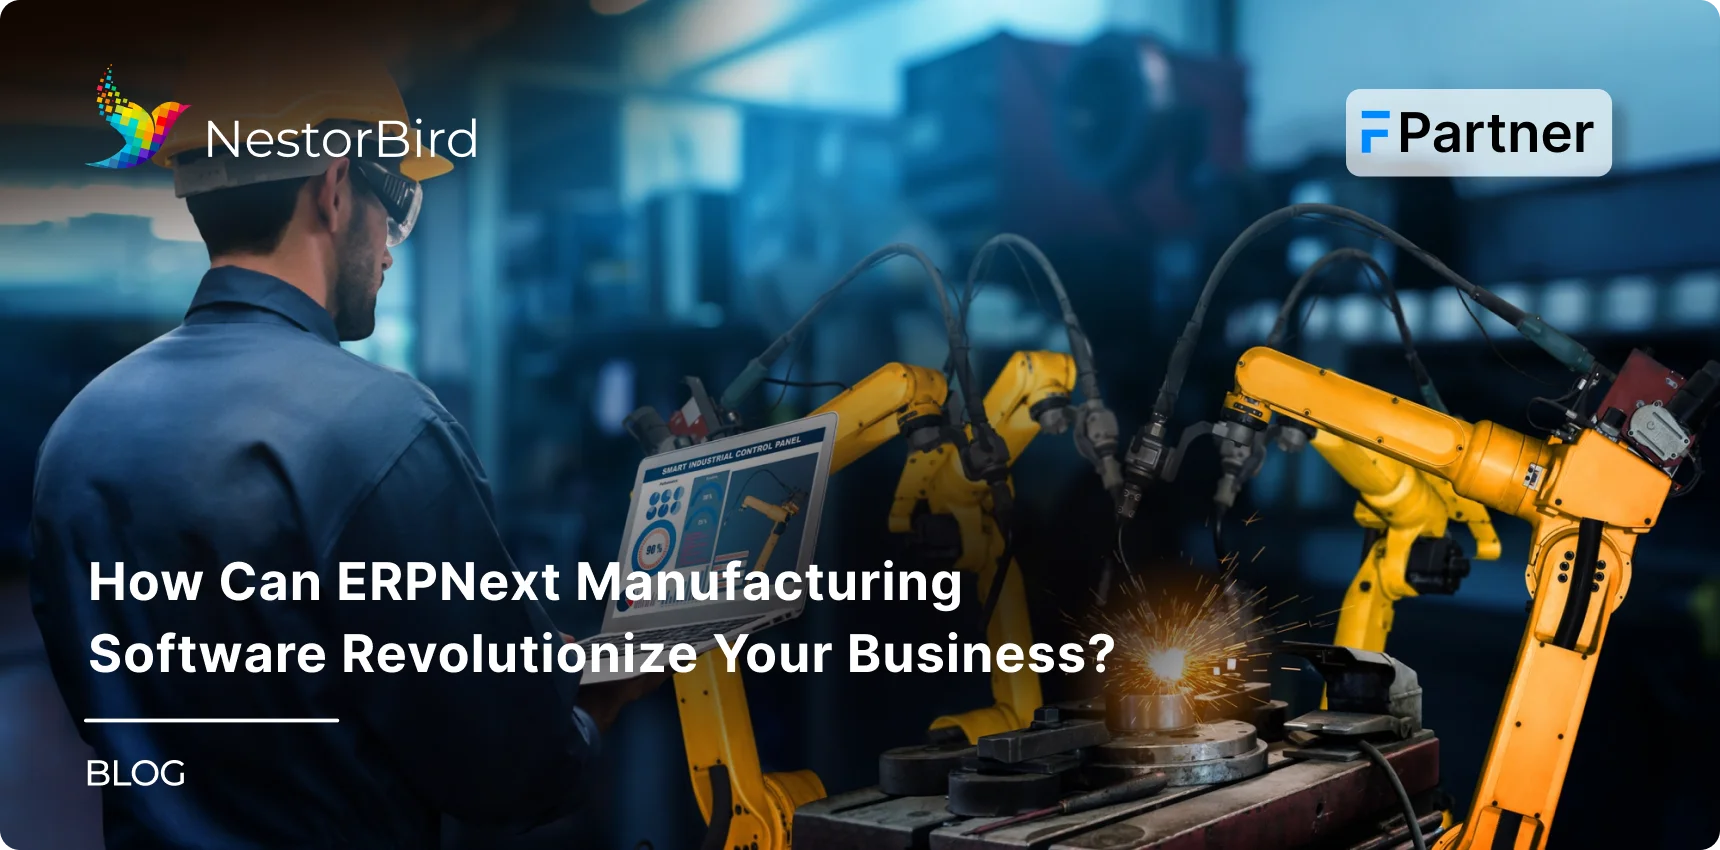 How Can ERPNext Manufacturing Software Revolutionize Your Business?